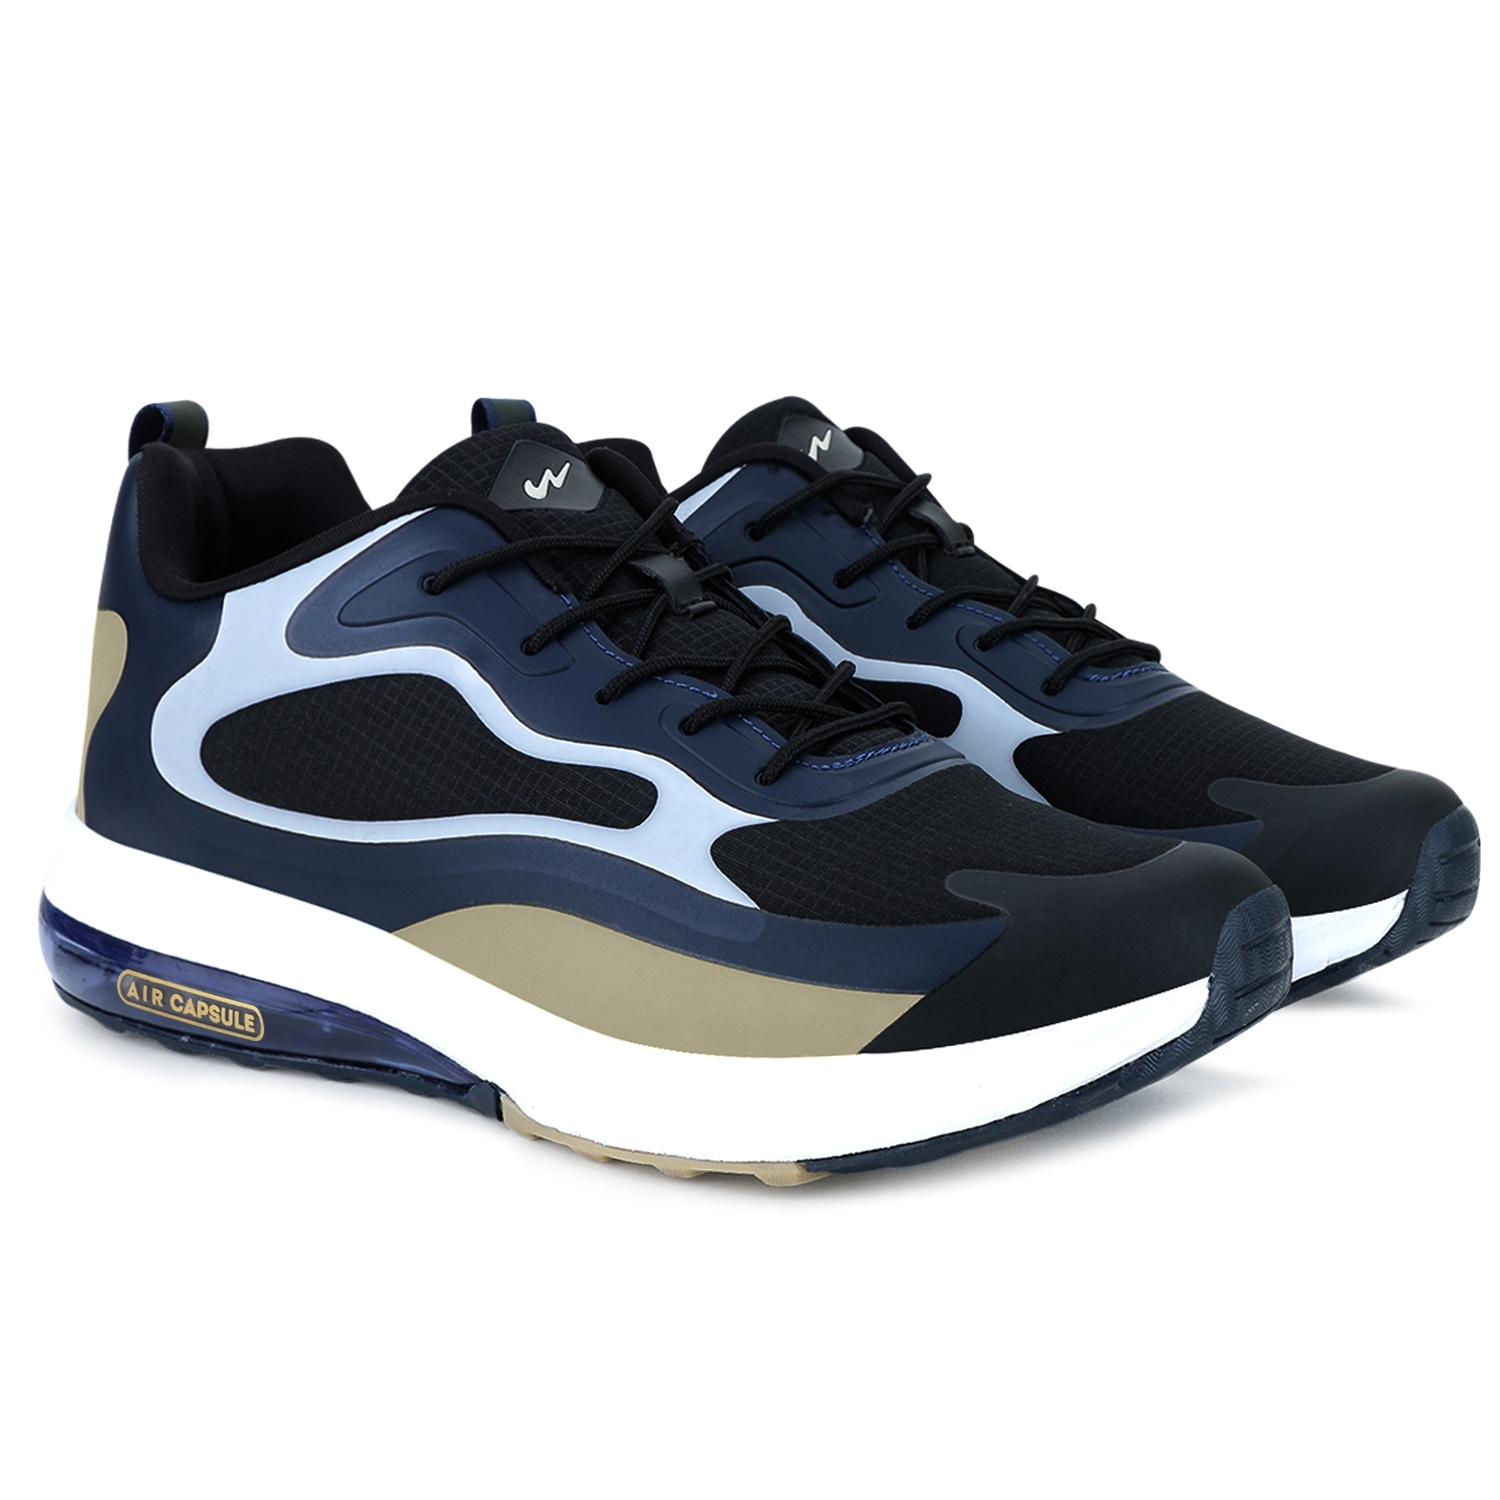 Campus Shoes | Black And Blue Renegade Running Shoes